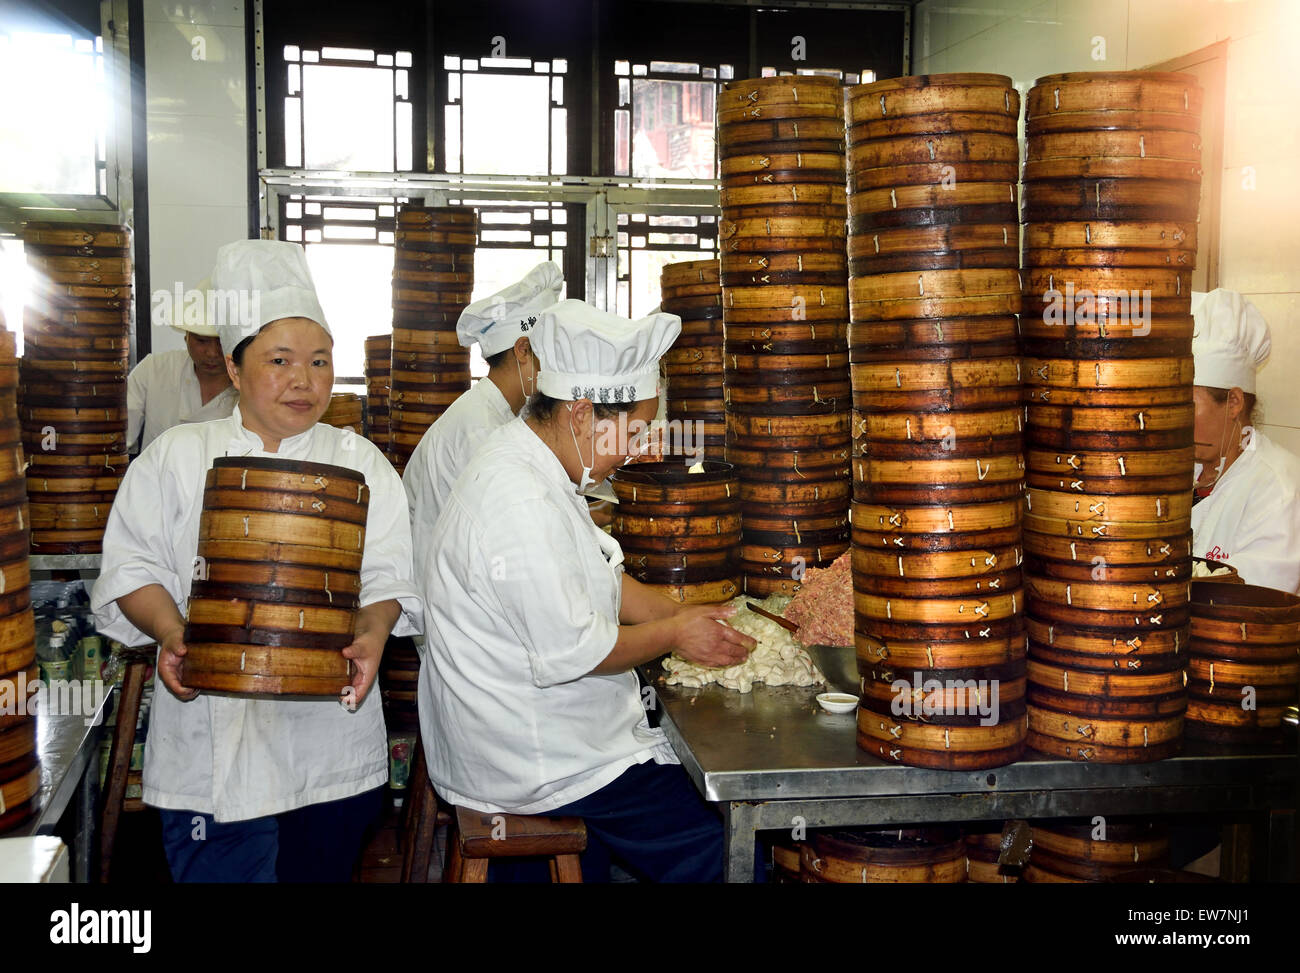 Yuyuan Garden Bazaar buildings founded by Ming dynasty Pan family ' Old Chinese city ' shopping area of Shanghai  China  ( Chinese chefs prepare Dim sum dumplings food baskets) Stock Photo